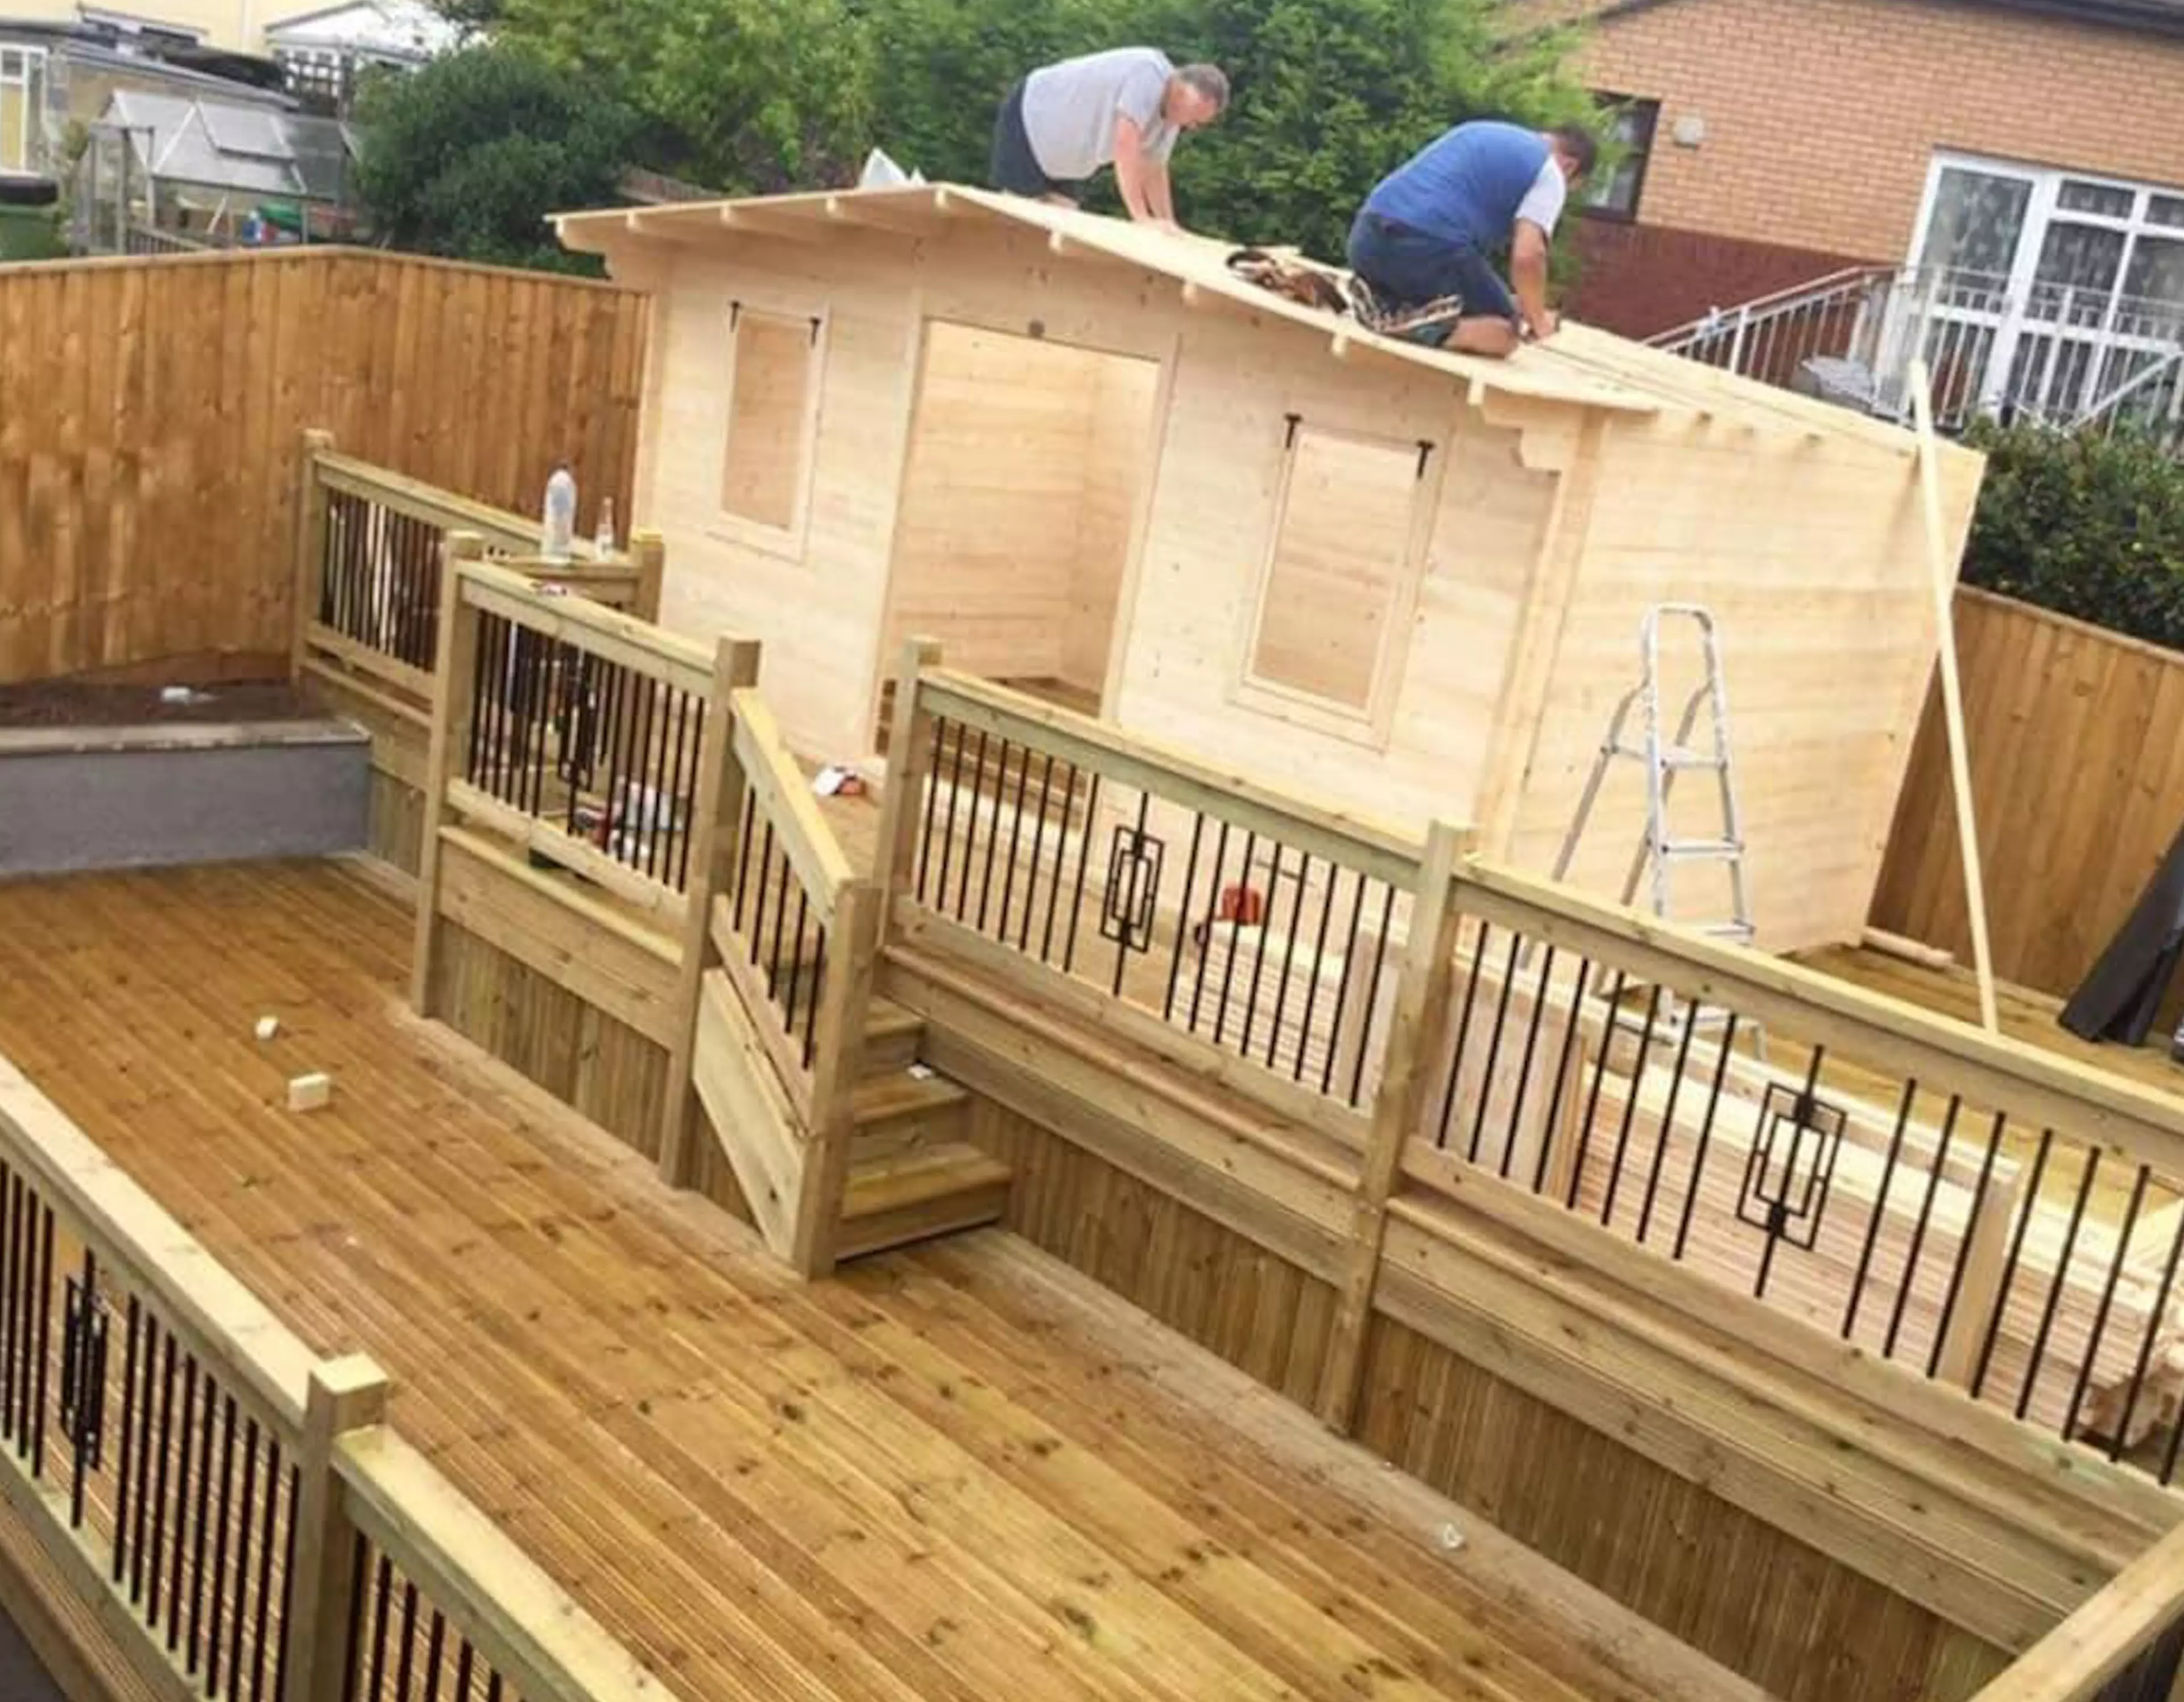 The back garden boozer took five months to build and cost just over £4,000 (